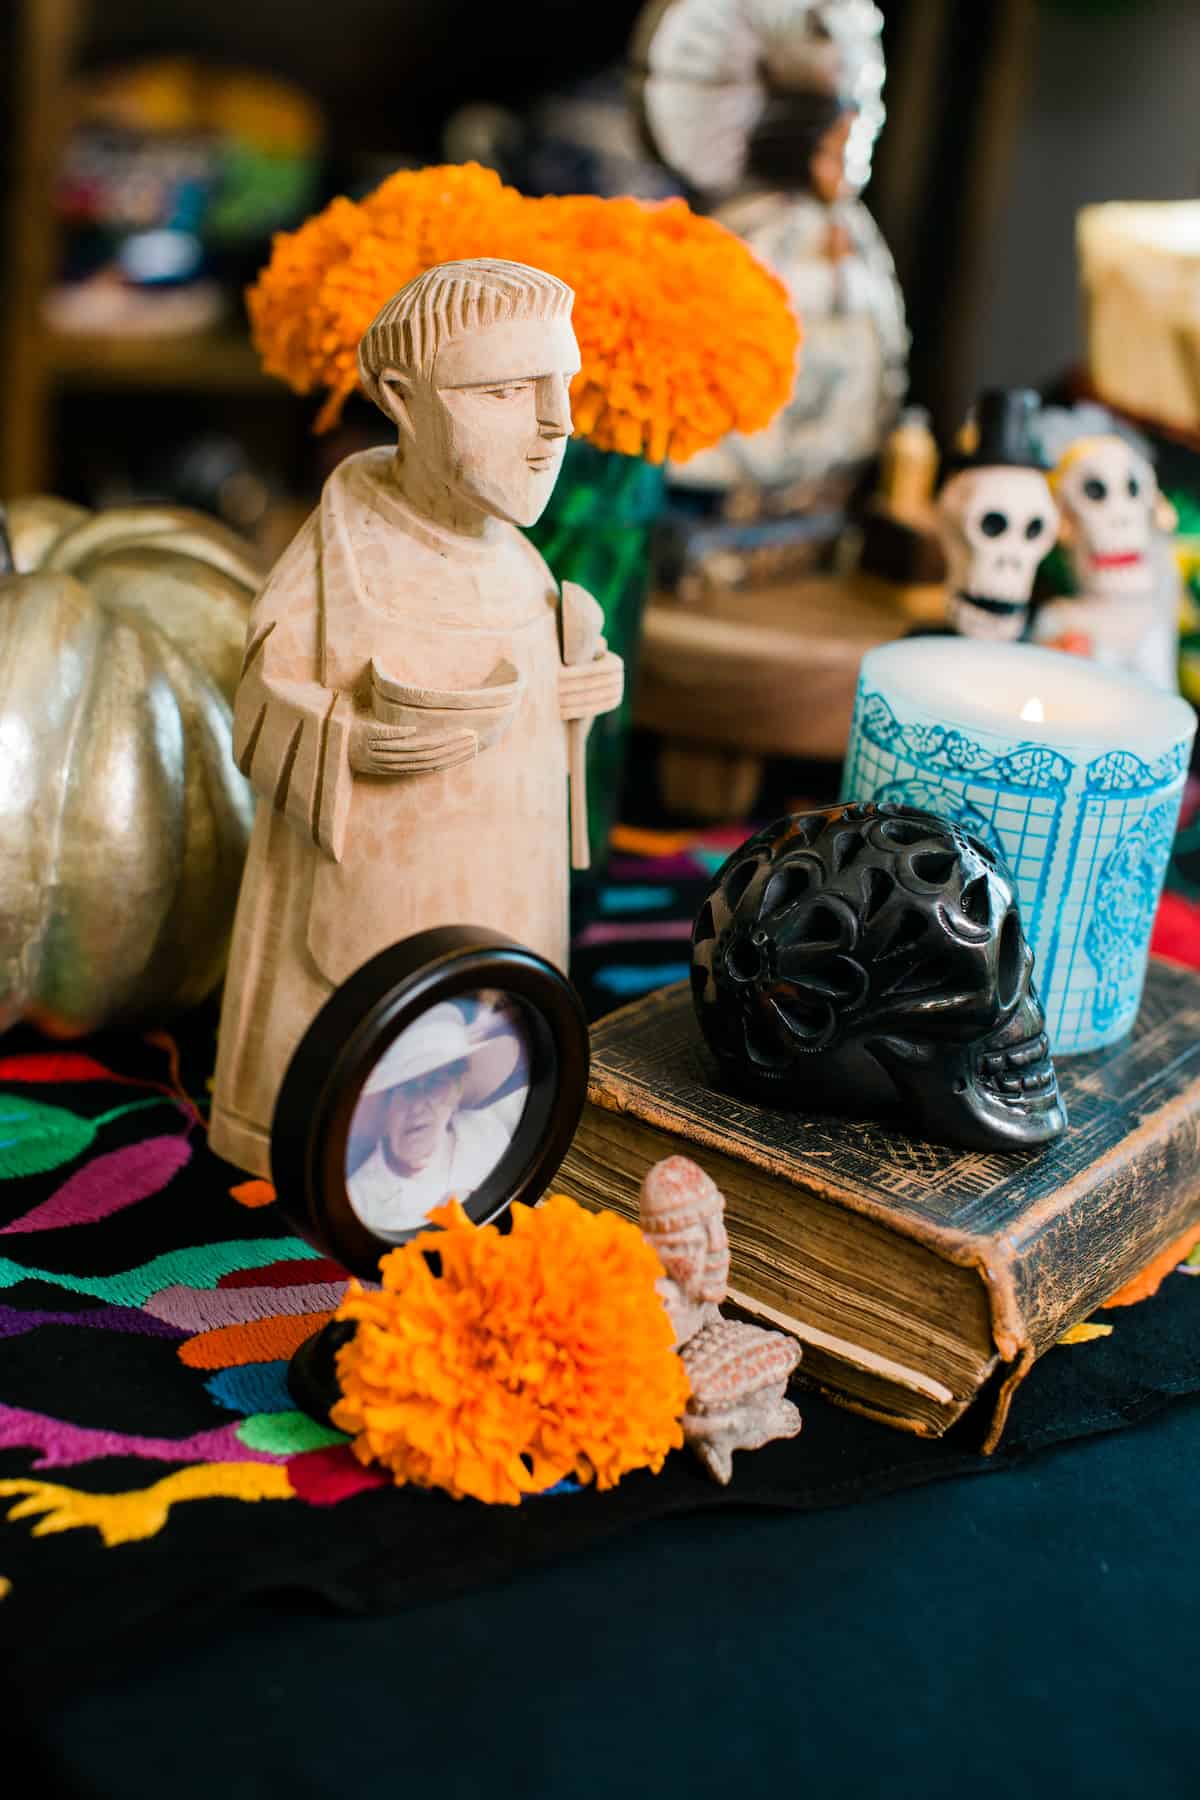 a close-up shot of a a mini alter for Dia de los Muertos adorned with family photographs, candles, marigolds, San Pascual and figurines